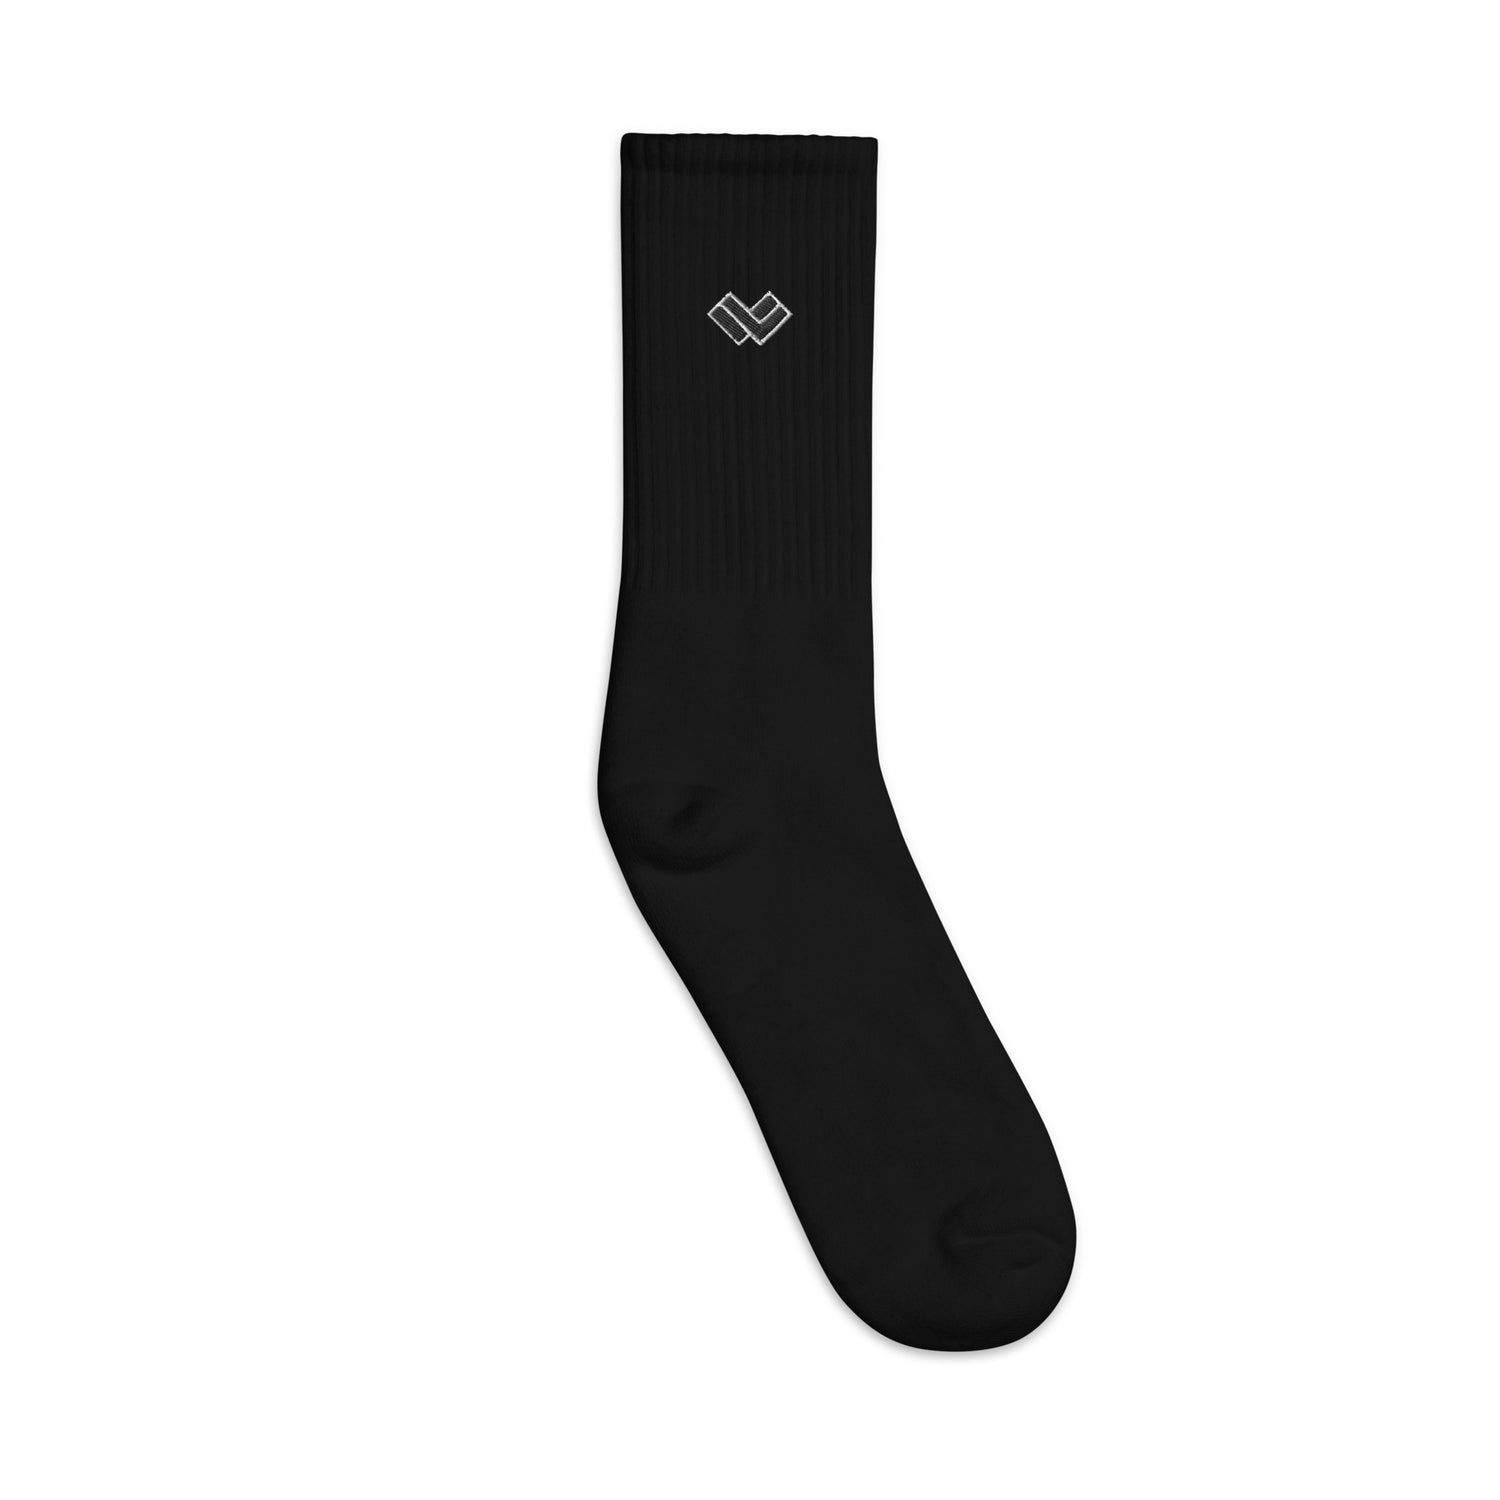 LAX World Cradle Collection - Game Socks